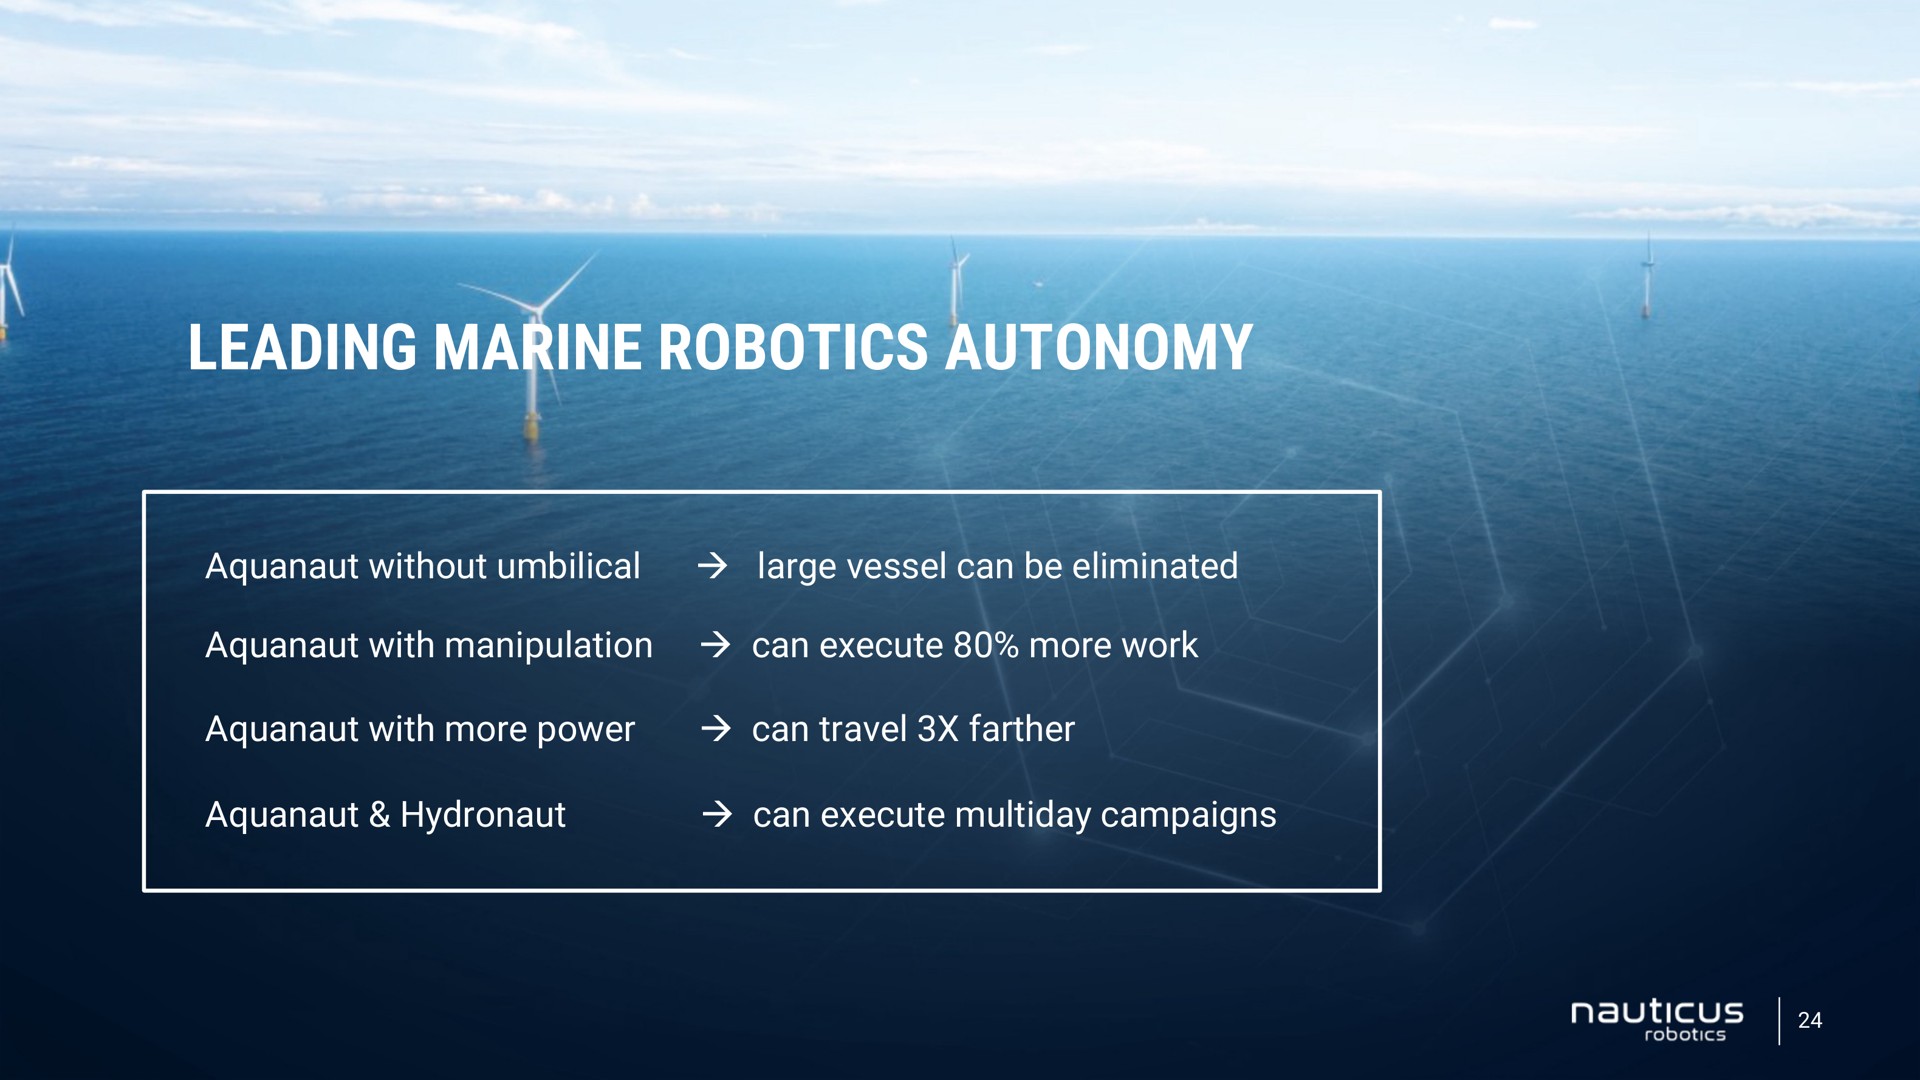 leading marine autonomy without umbilical large vessel can be eliminated with manipulation can execute more work with more power can travel farther can execute campaigns | Nauticus